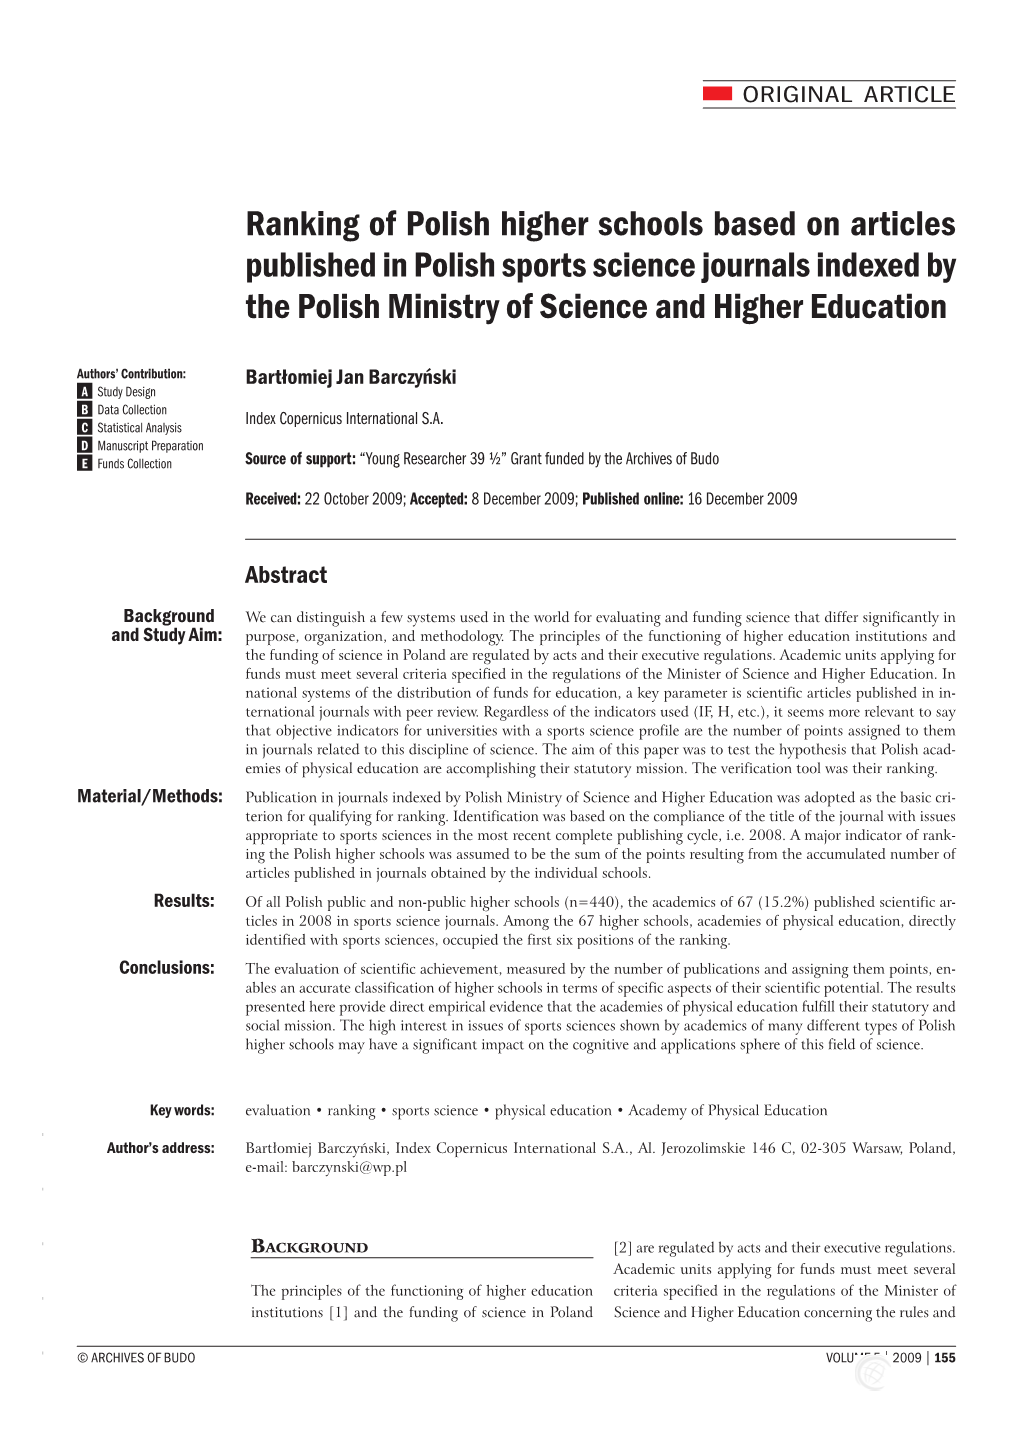 Ranking of Polish Higher Schools Based on Articles Published in Polish Sports Science Journals Indexed by the Polish Ministry of Science and Higher Education